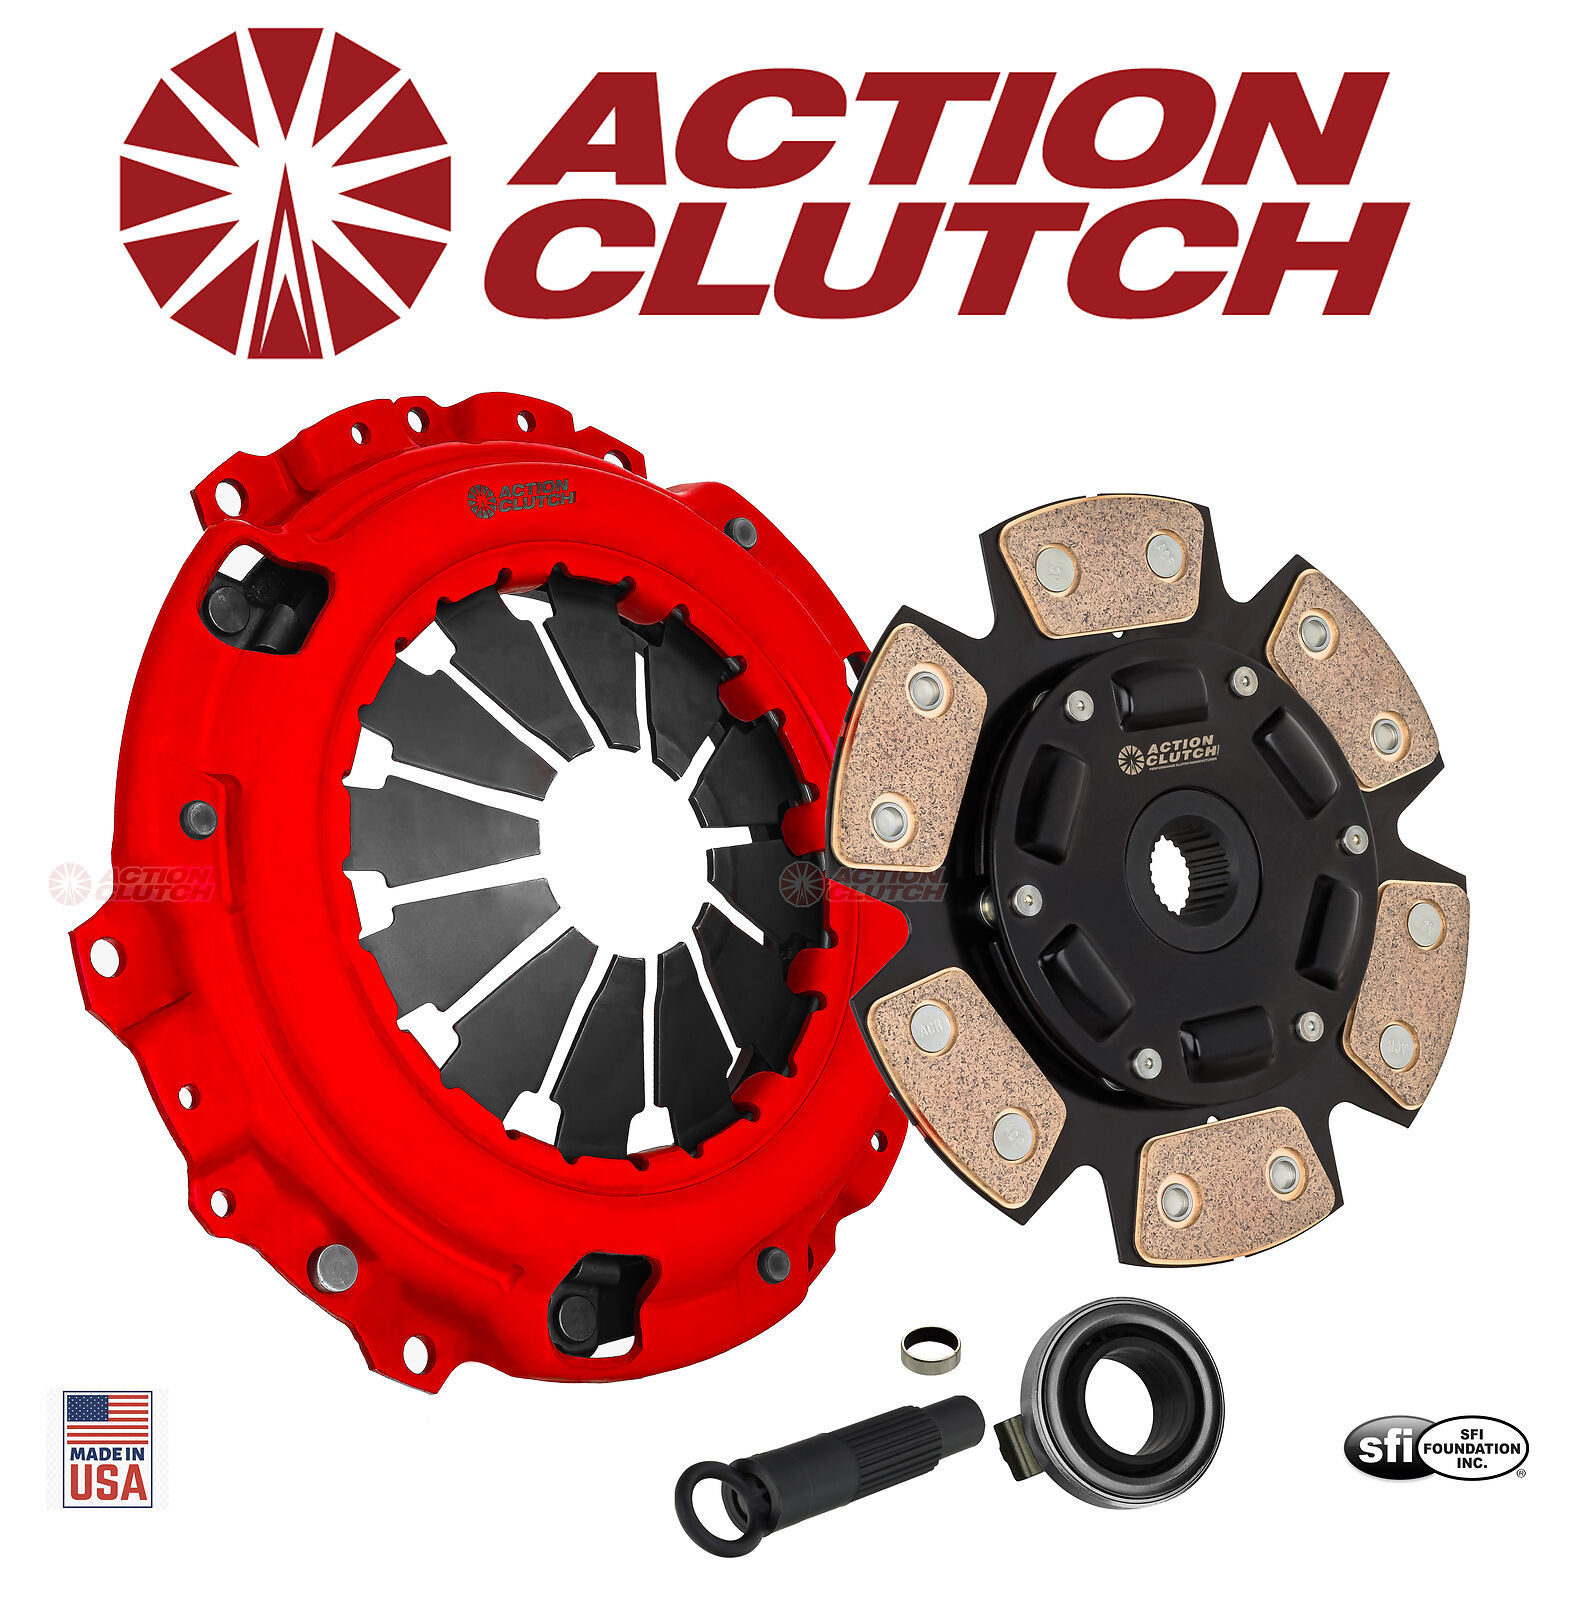 ACTION CLUTCH STAGE 3 CLUTCH KIT FITS HONDA CIVIC Si 6-SPEED K20 RSX TYPE S 2.0L